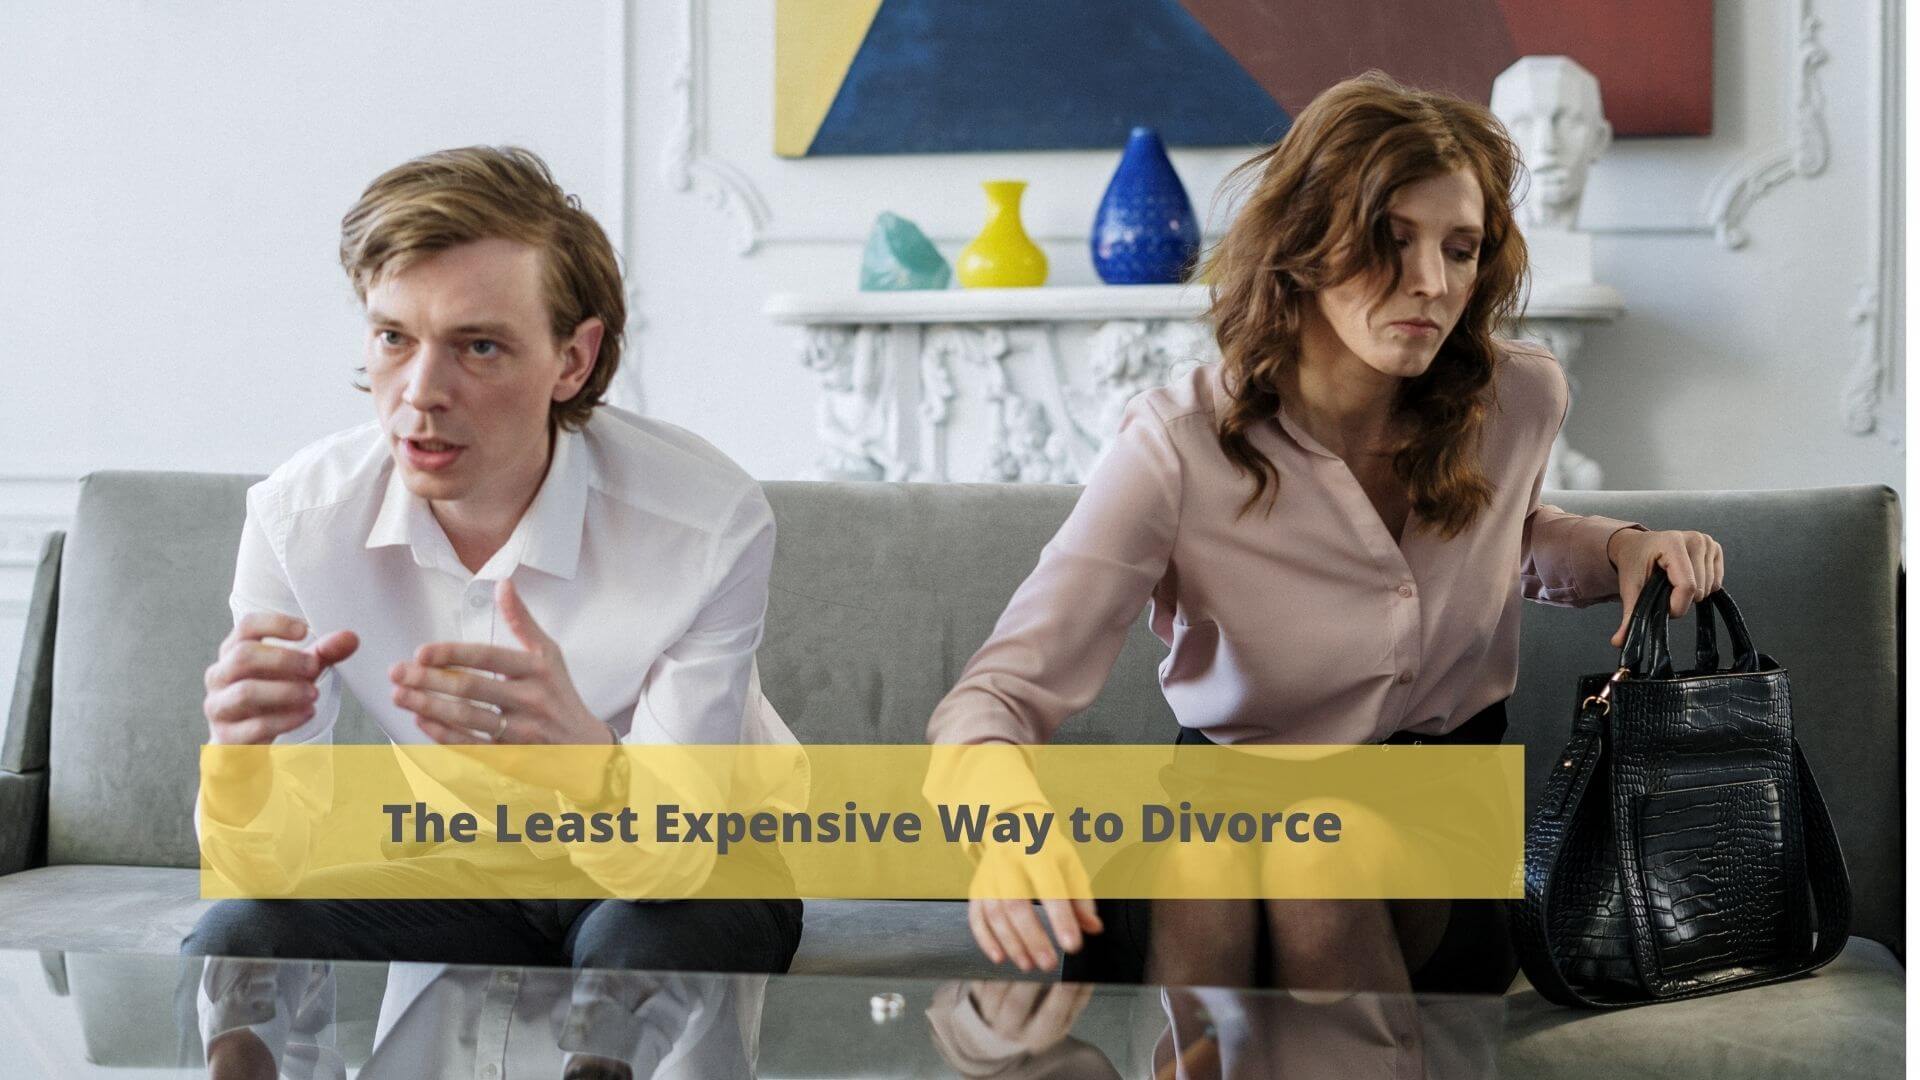 The Least Expensive Way to Divorce